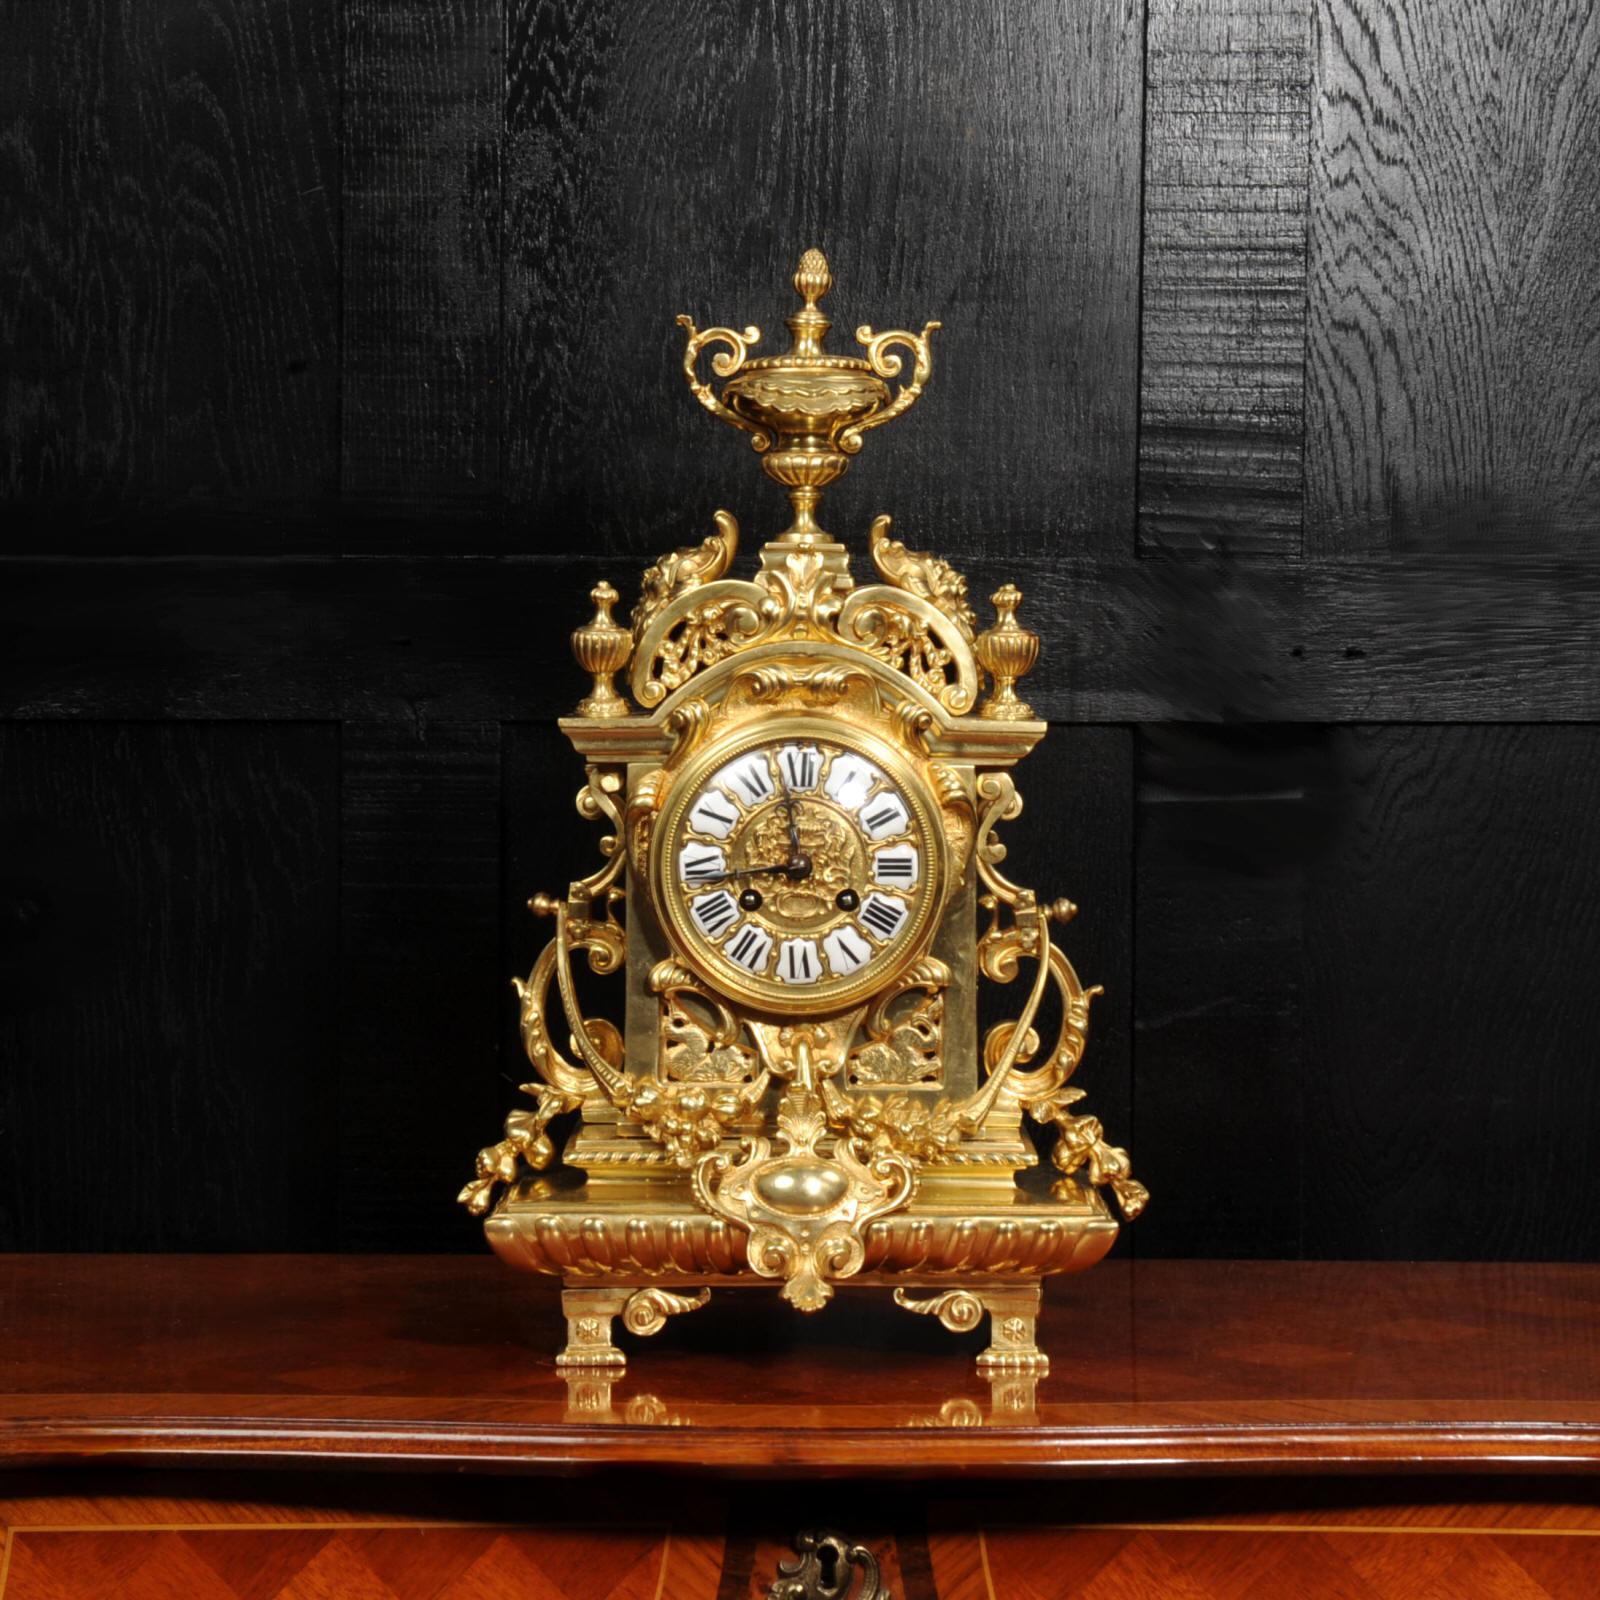 A large and stunning original antique French Baroque clock. Designed as a romantic ruin with an arched top with grotesque masks, fretted side panels and sitting on a gadrooned cushion base. To the sides are 'C' scrolls, and flowers and foliage are